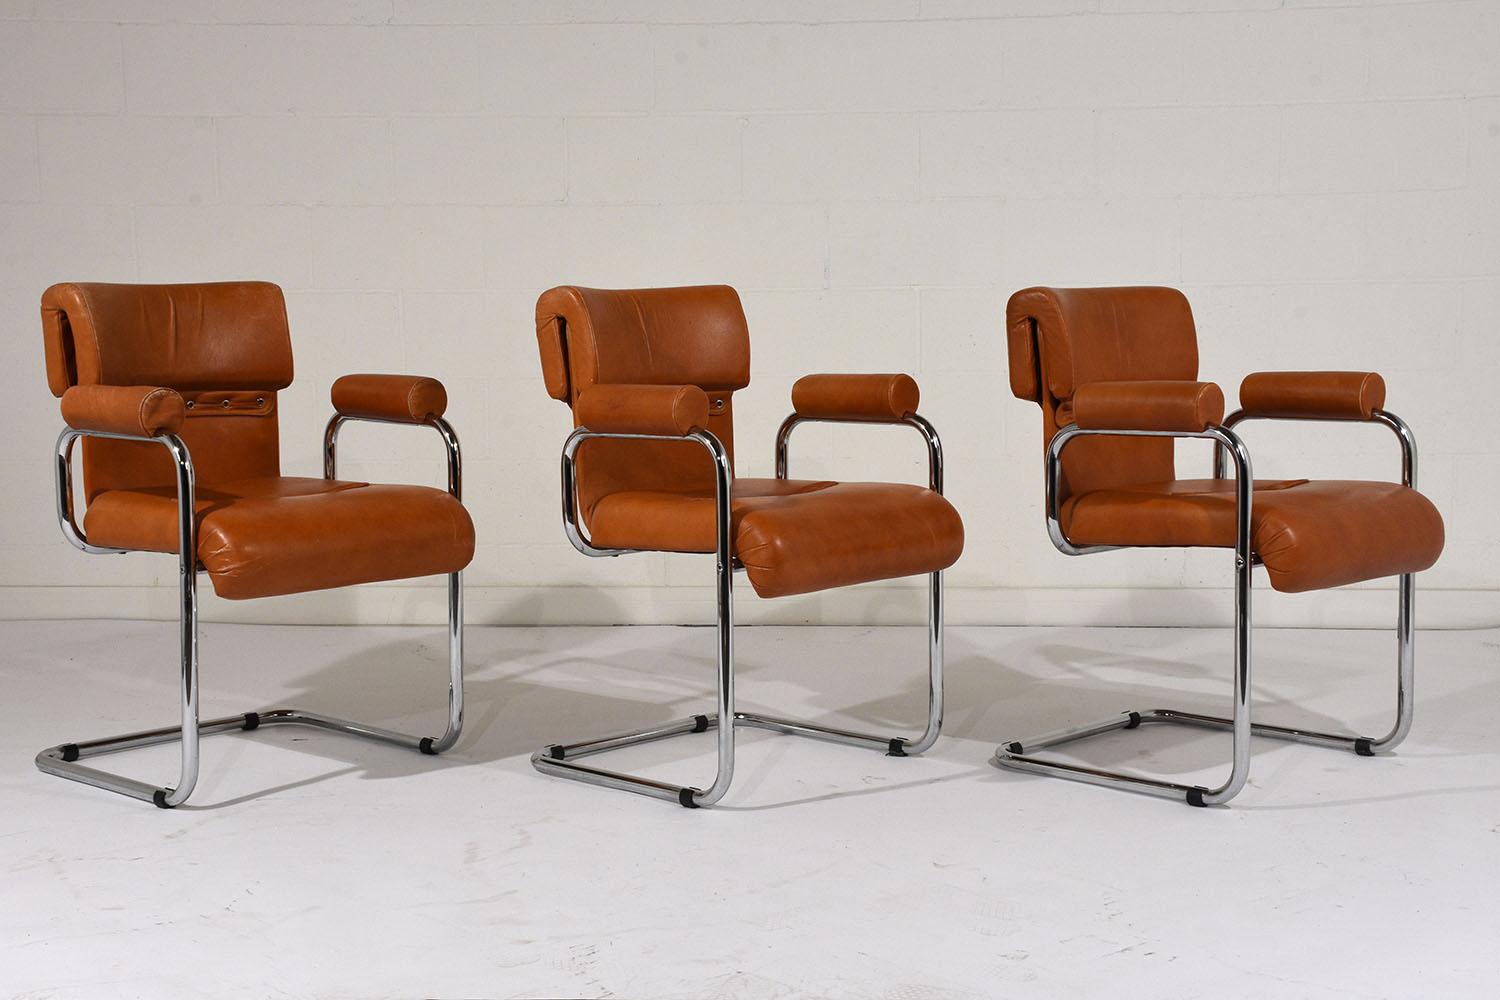 Dyed Set of 6 Leather Chairs by Guido Faleschini for Mariani